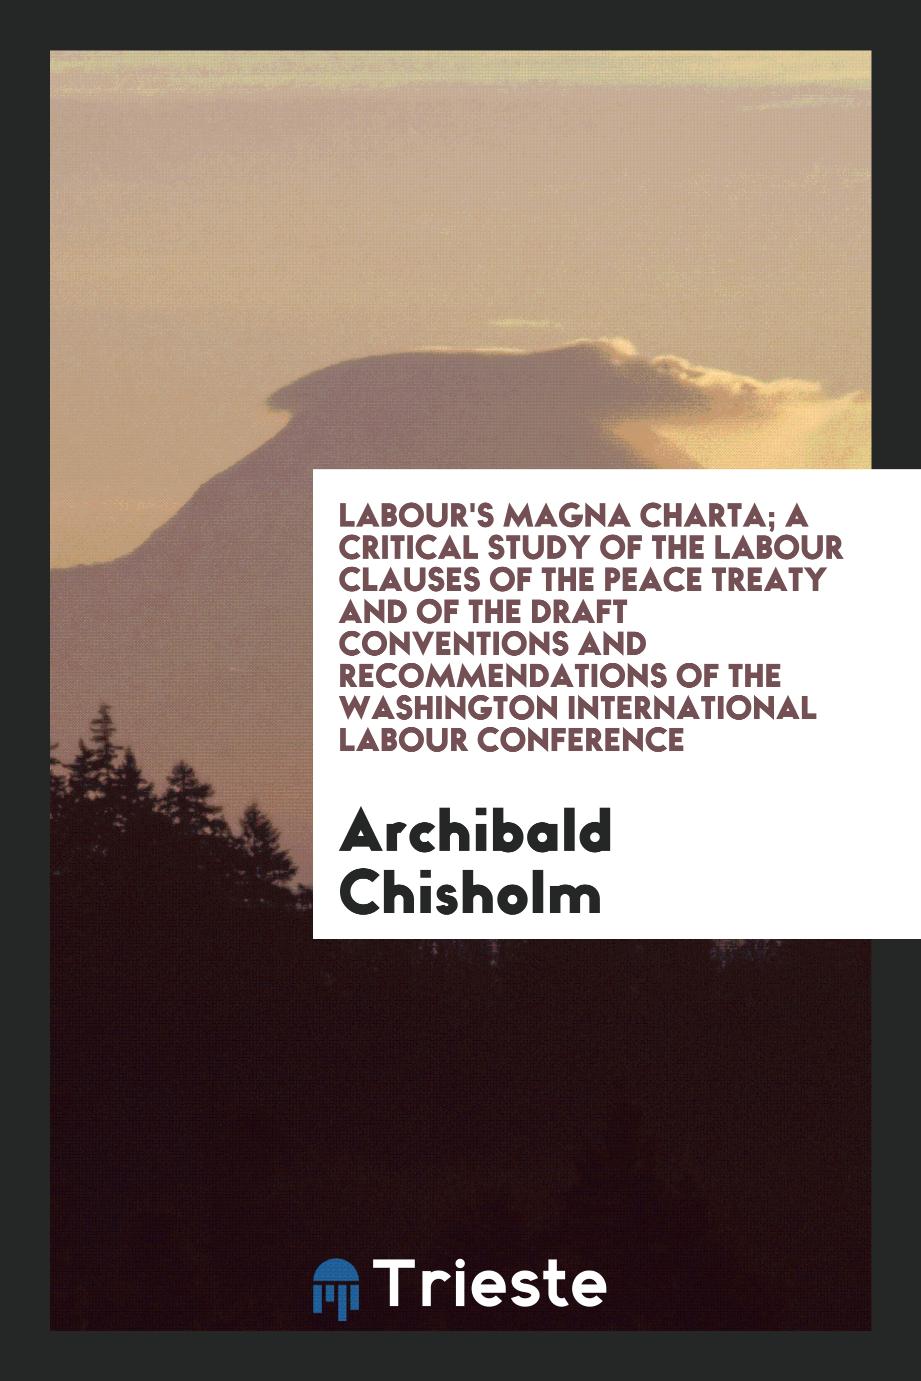 Labour's Magna Charta; a critical study of the labour clauses of the Peace treaty and of the draft conventions and recommendations of the Washington International Labour Conference